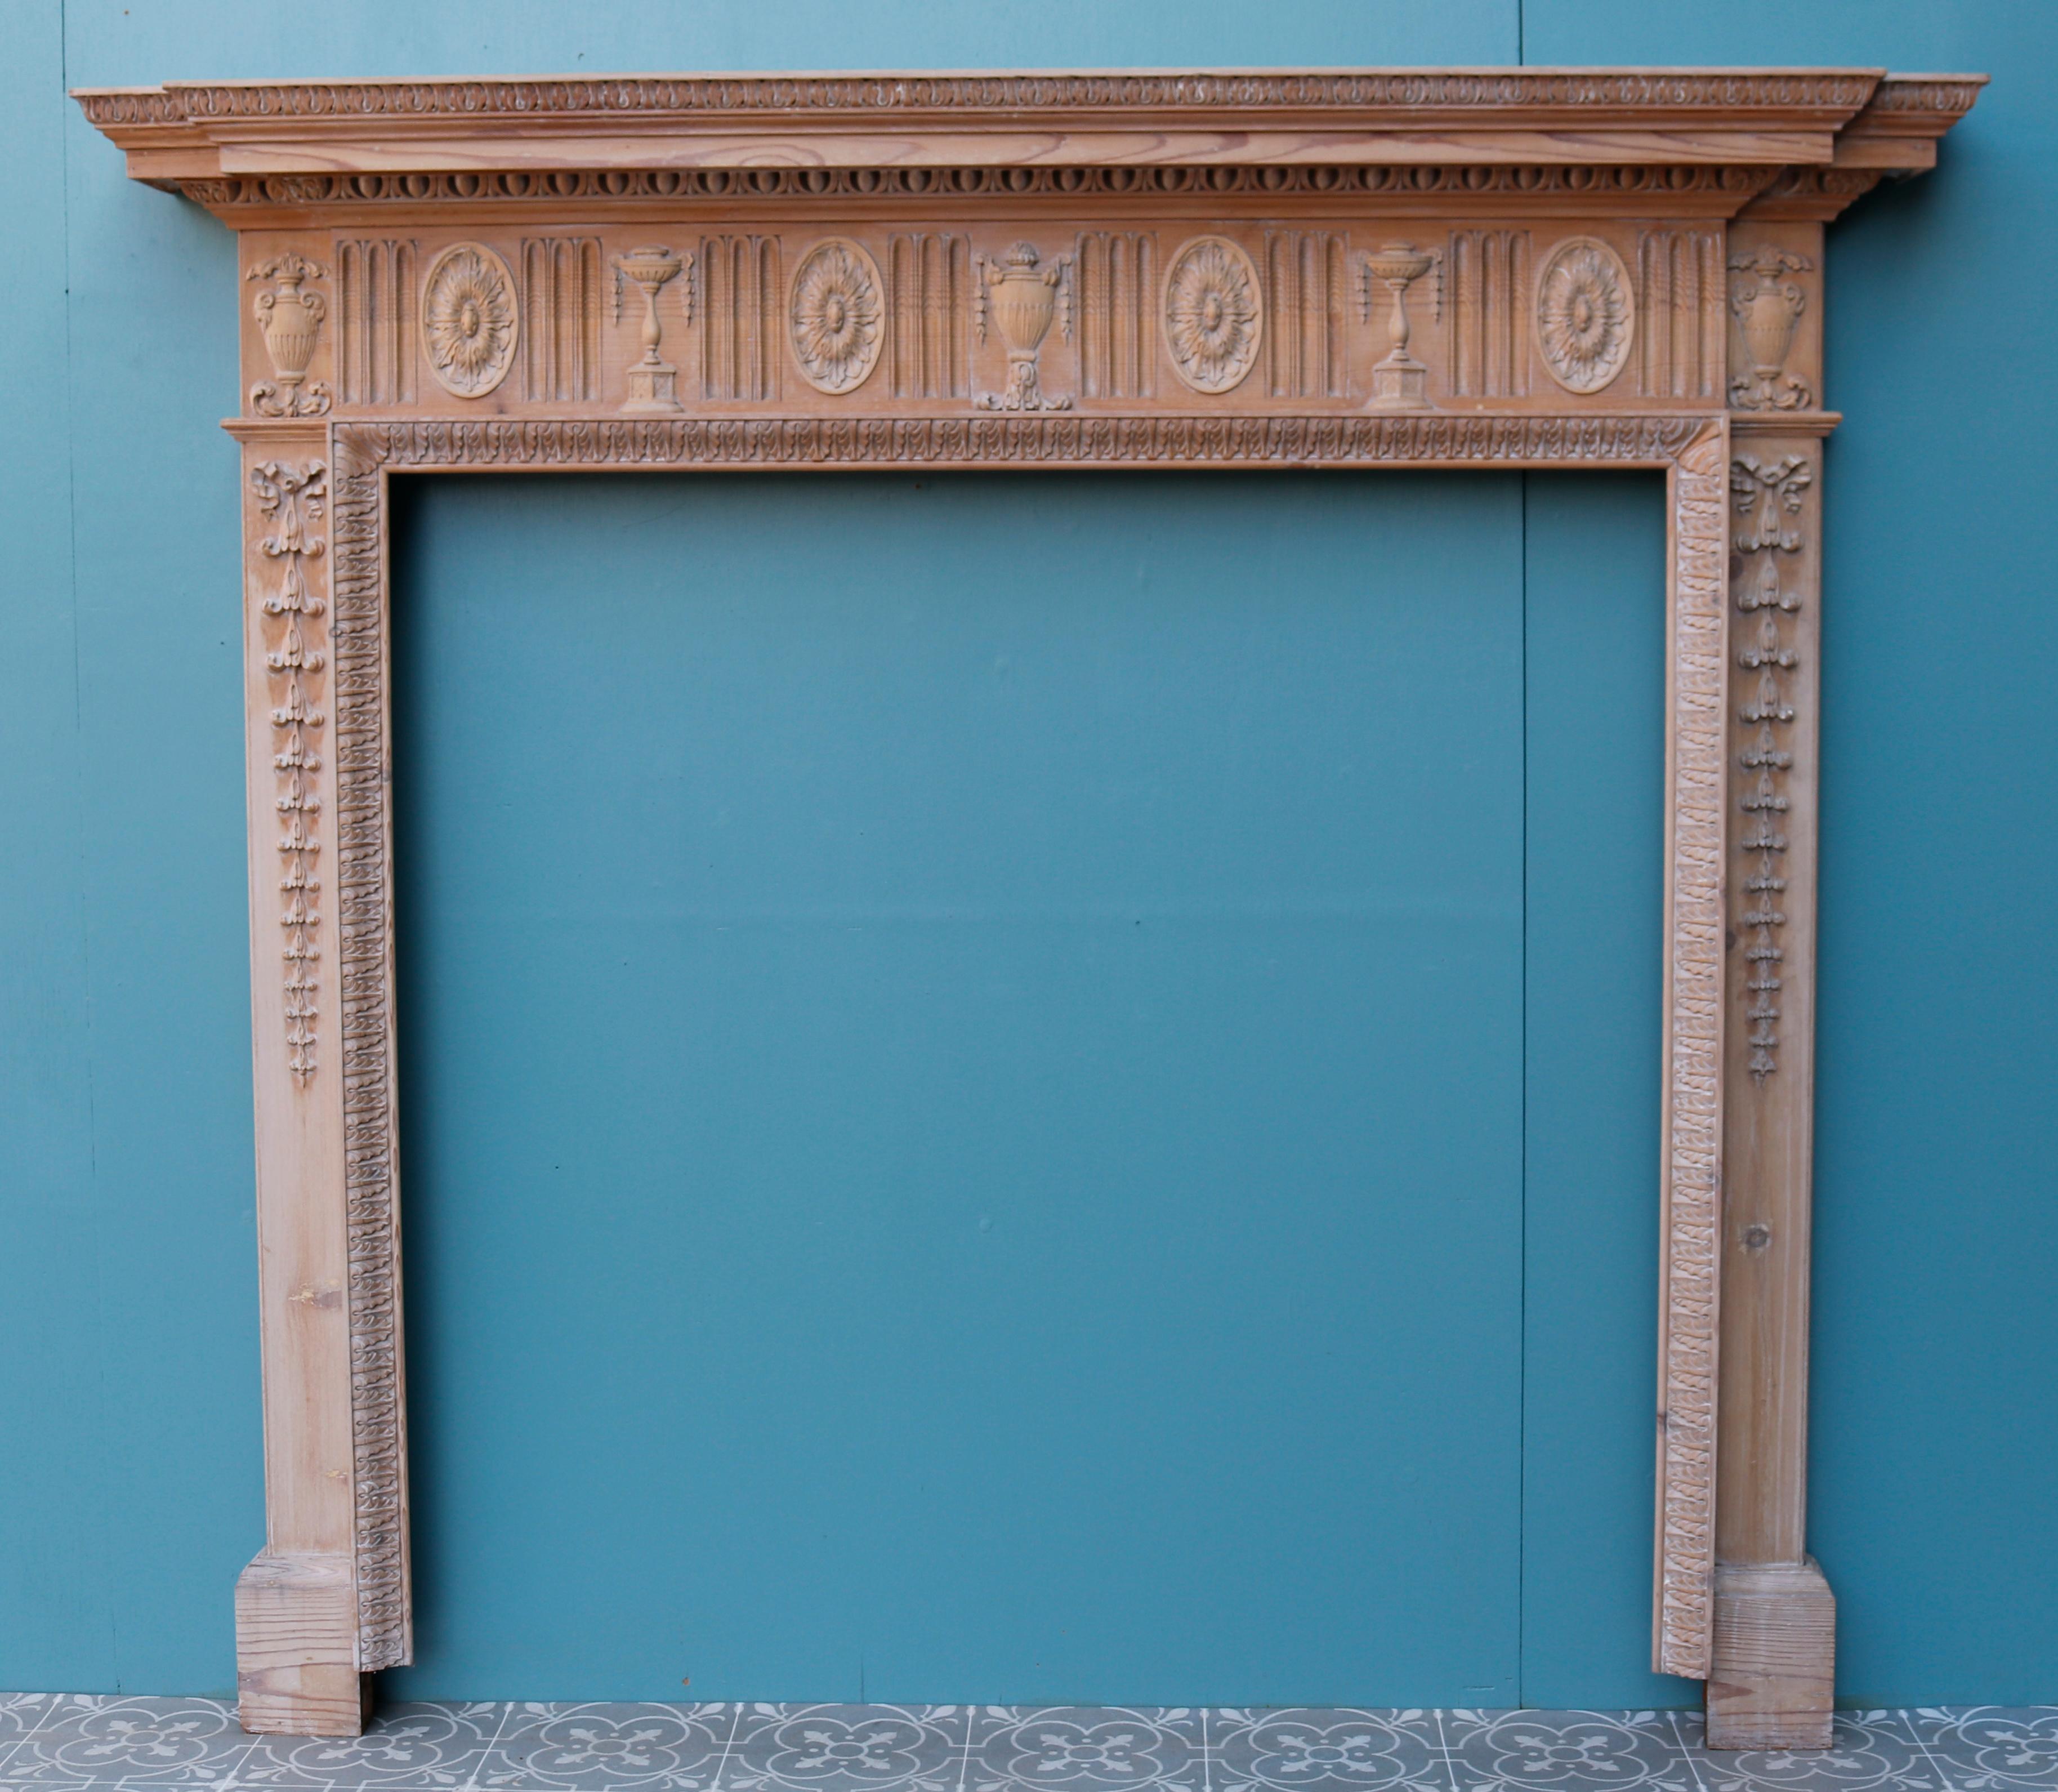 A very attractive Georgian style fire surround constructed from pine. The fireplace has finely carved details across both the jambs and frieze.

Additional Dimensions 

Opening Height 106.5 cm

Opening Width 103.5 cm

Width between outsides